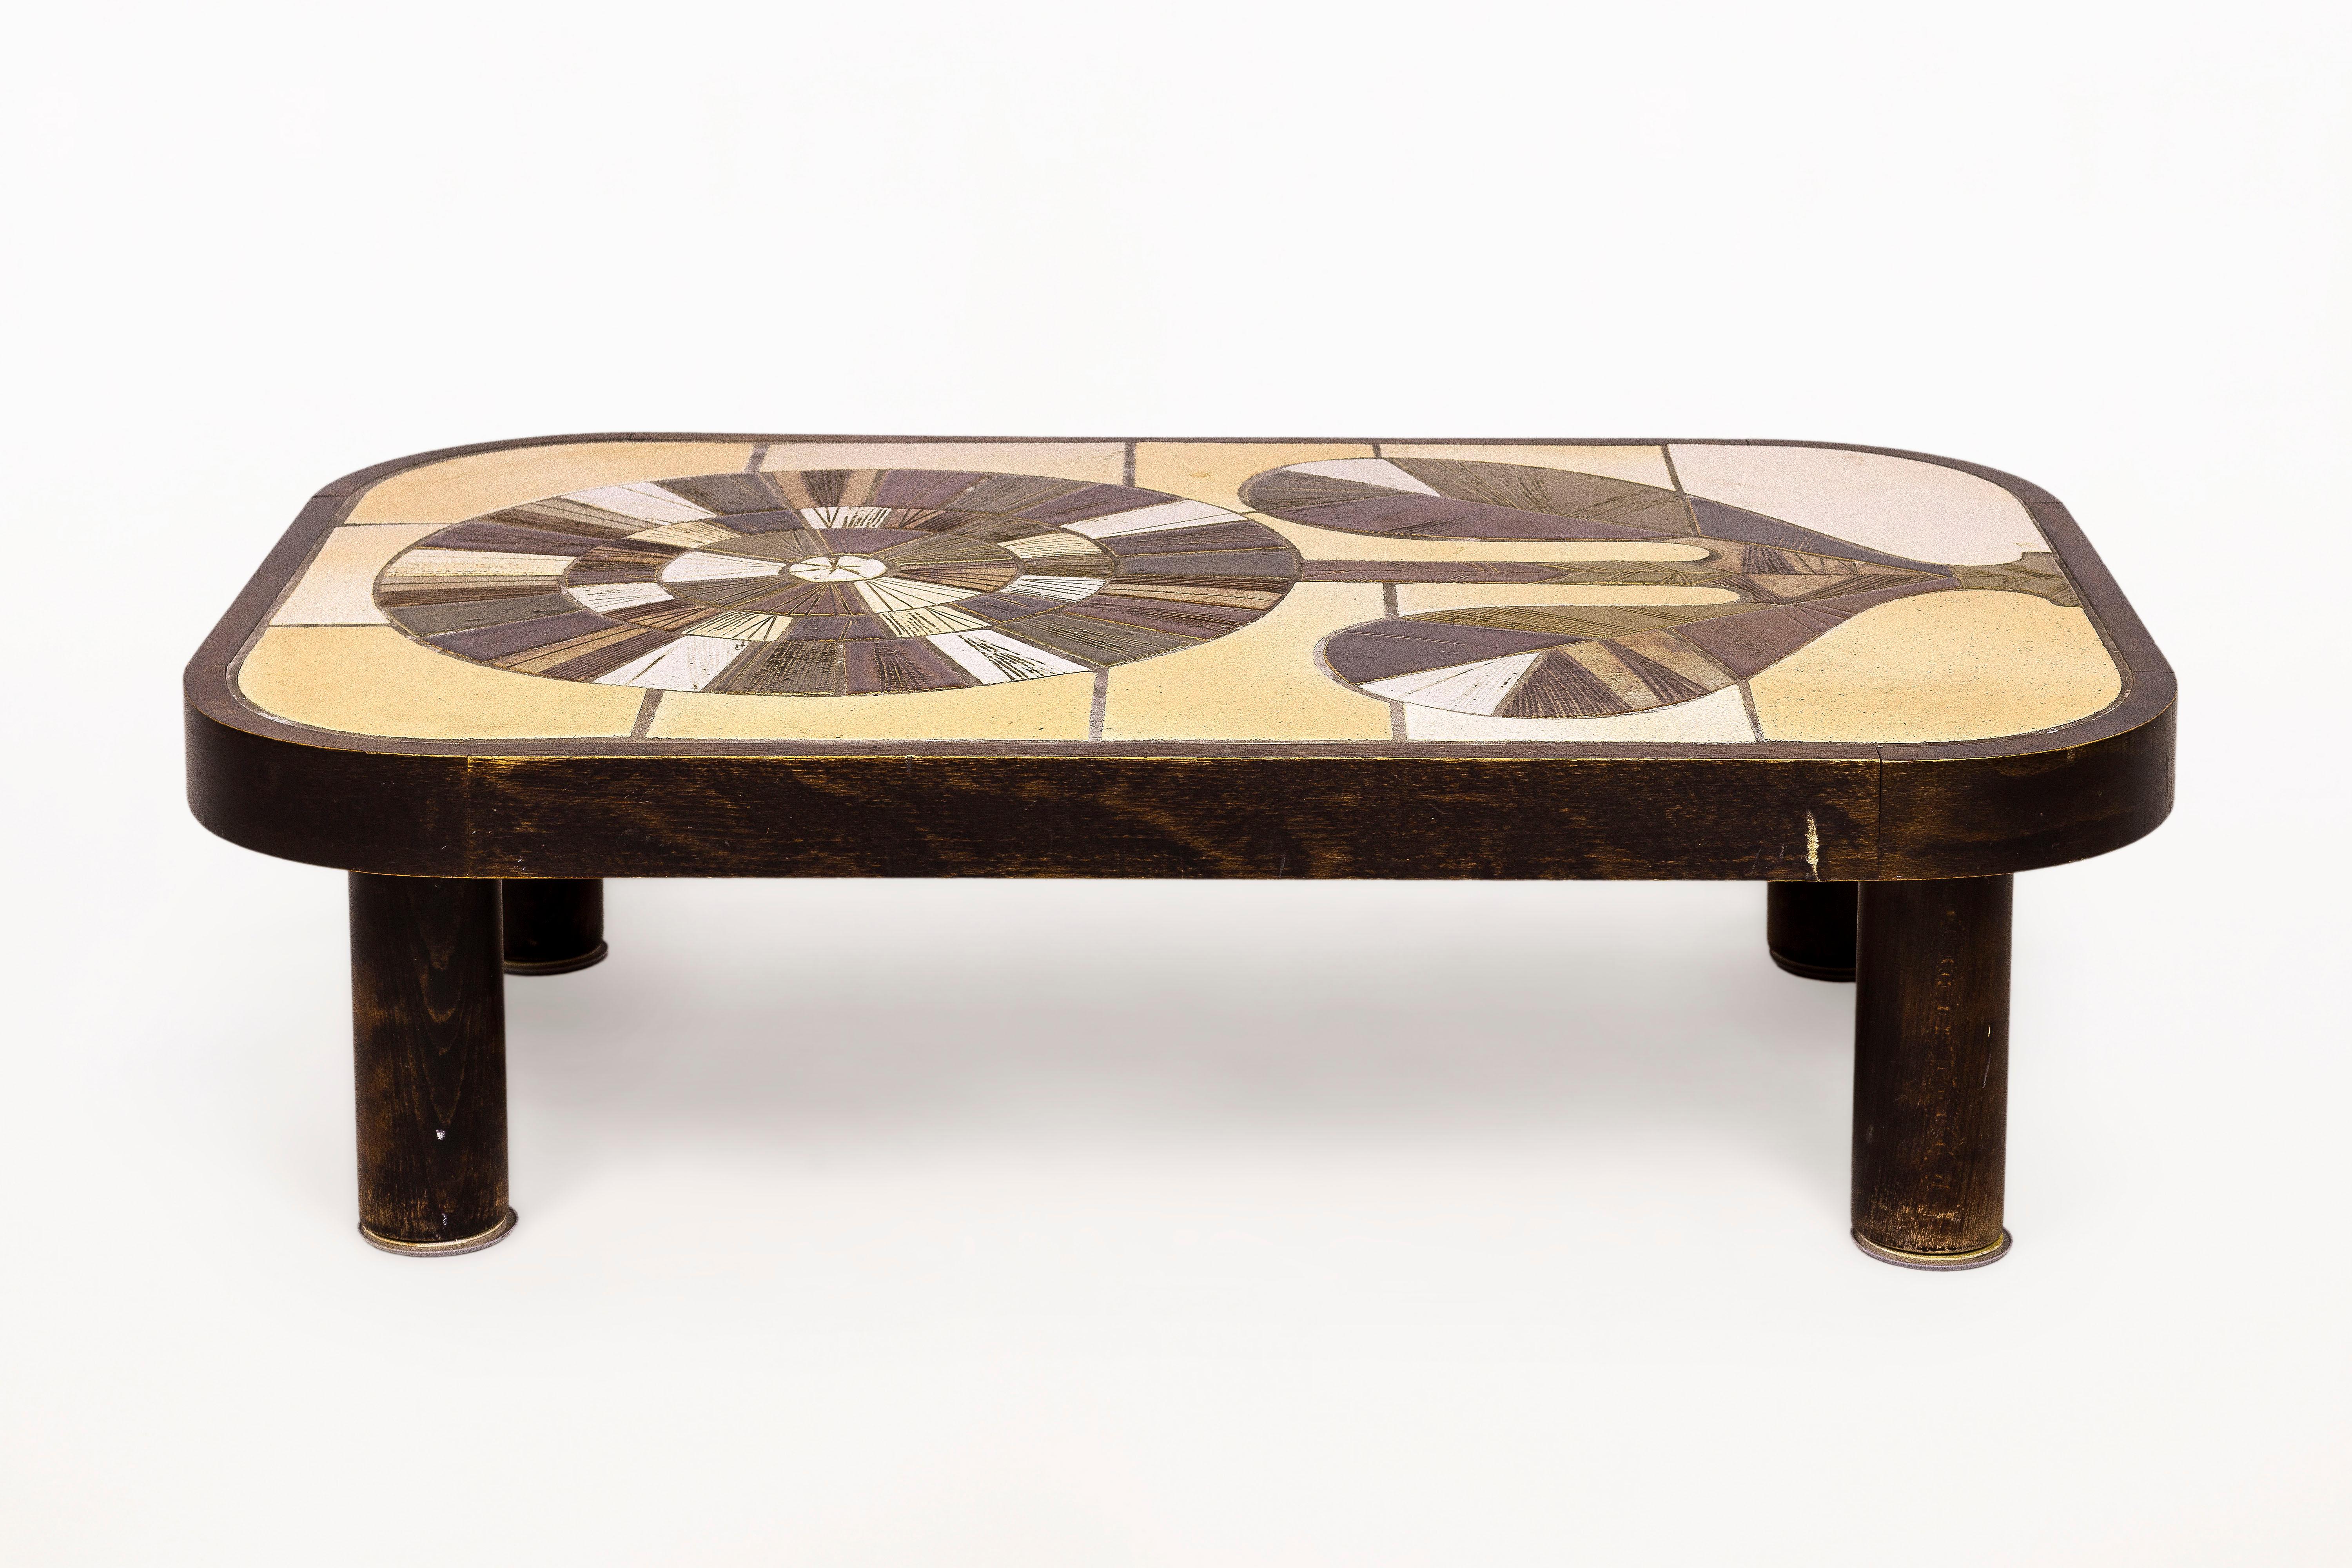 Roger Capron coffee table.
Ceramic coffee table with wooden frame
Iconic Flower Motif
Signed,
circa 1960, France.
Very good vintage condition.
Roger Capron was born in Vincennes, France on September 4, 1922. Interested in drawing, he studied